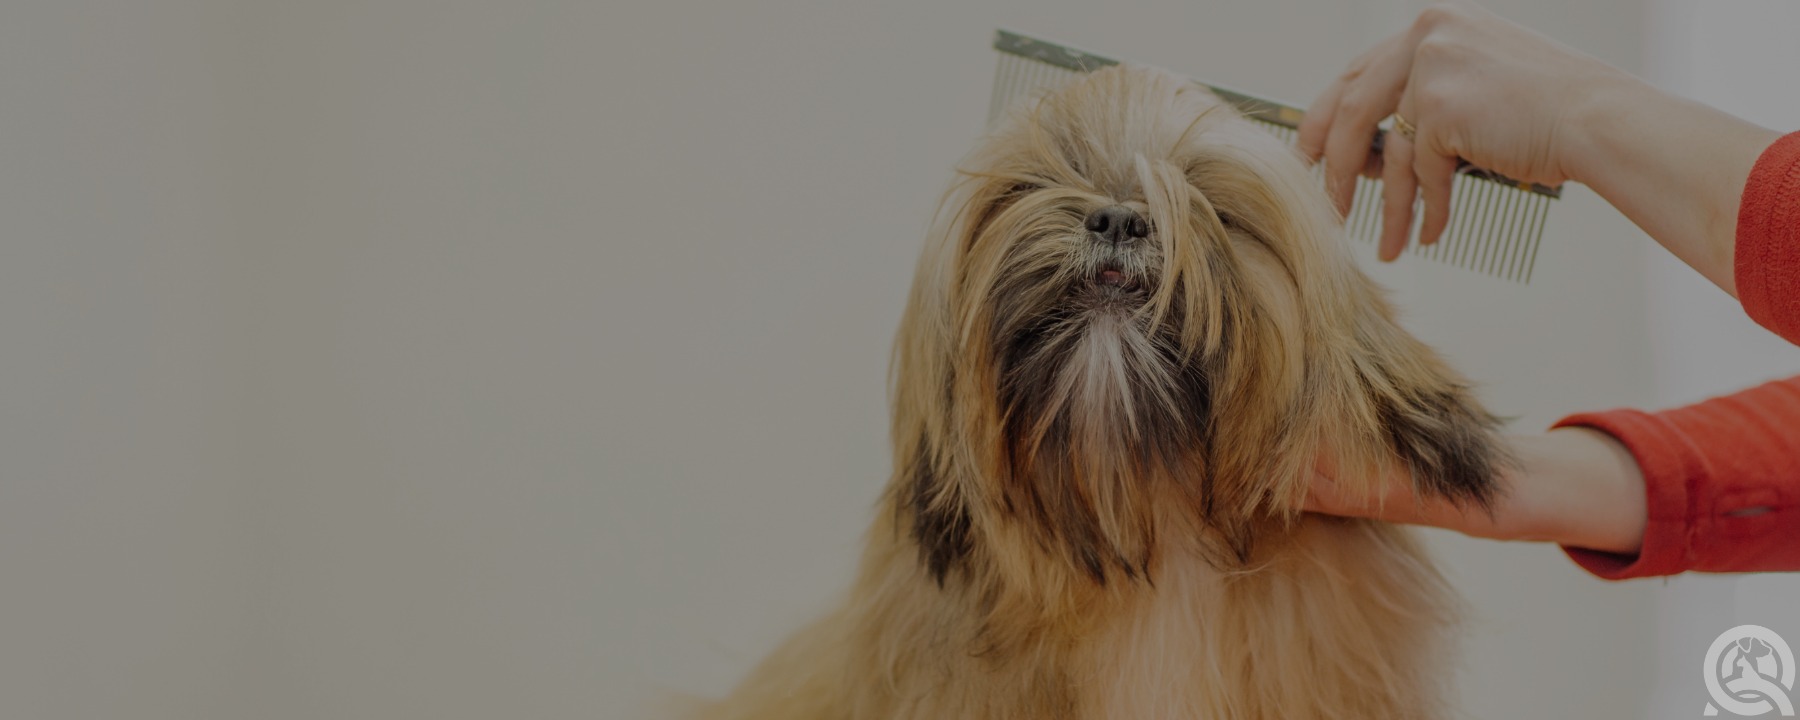 6 Associations Every Certified Dog Groomer Should Join